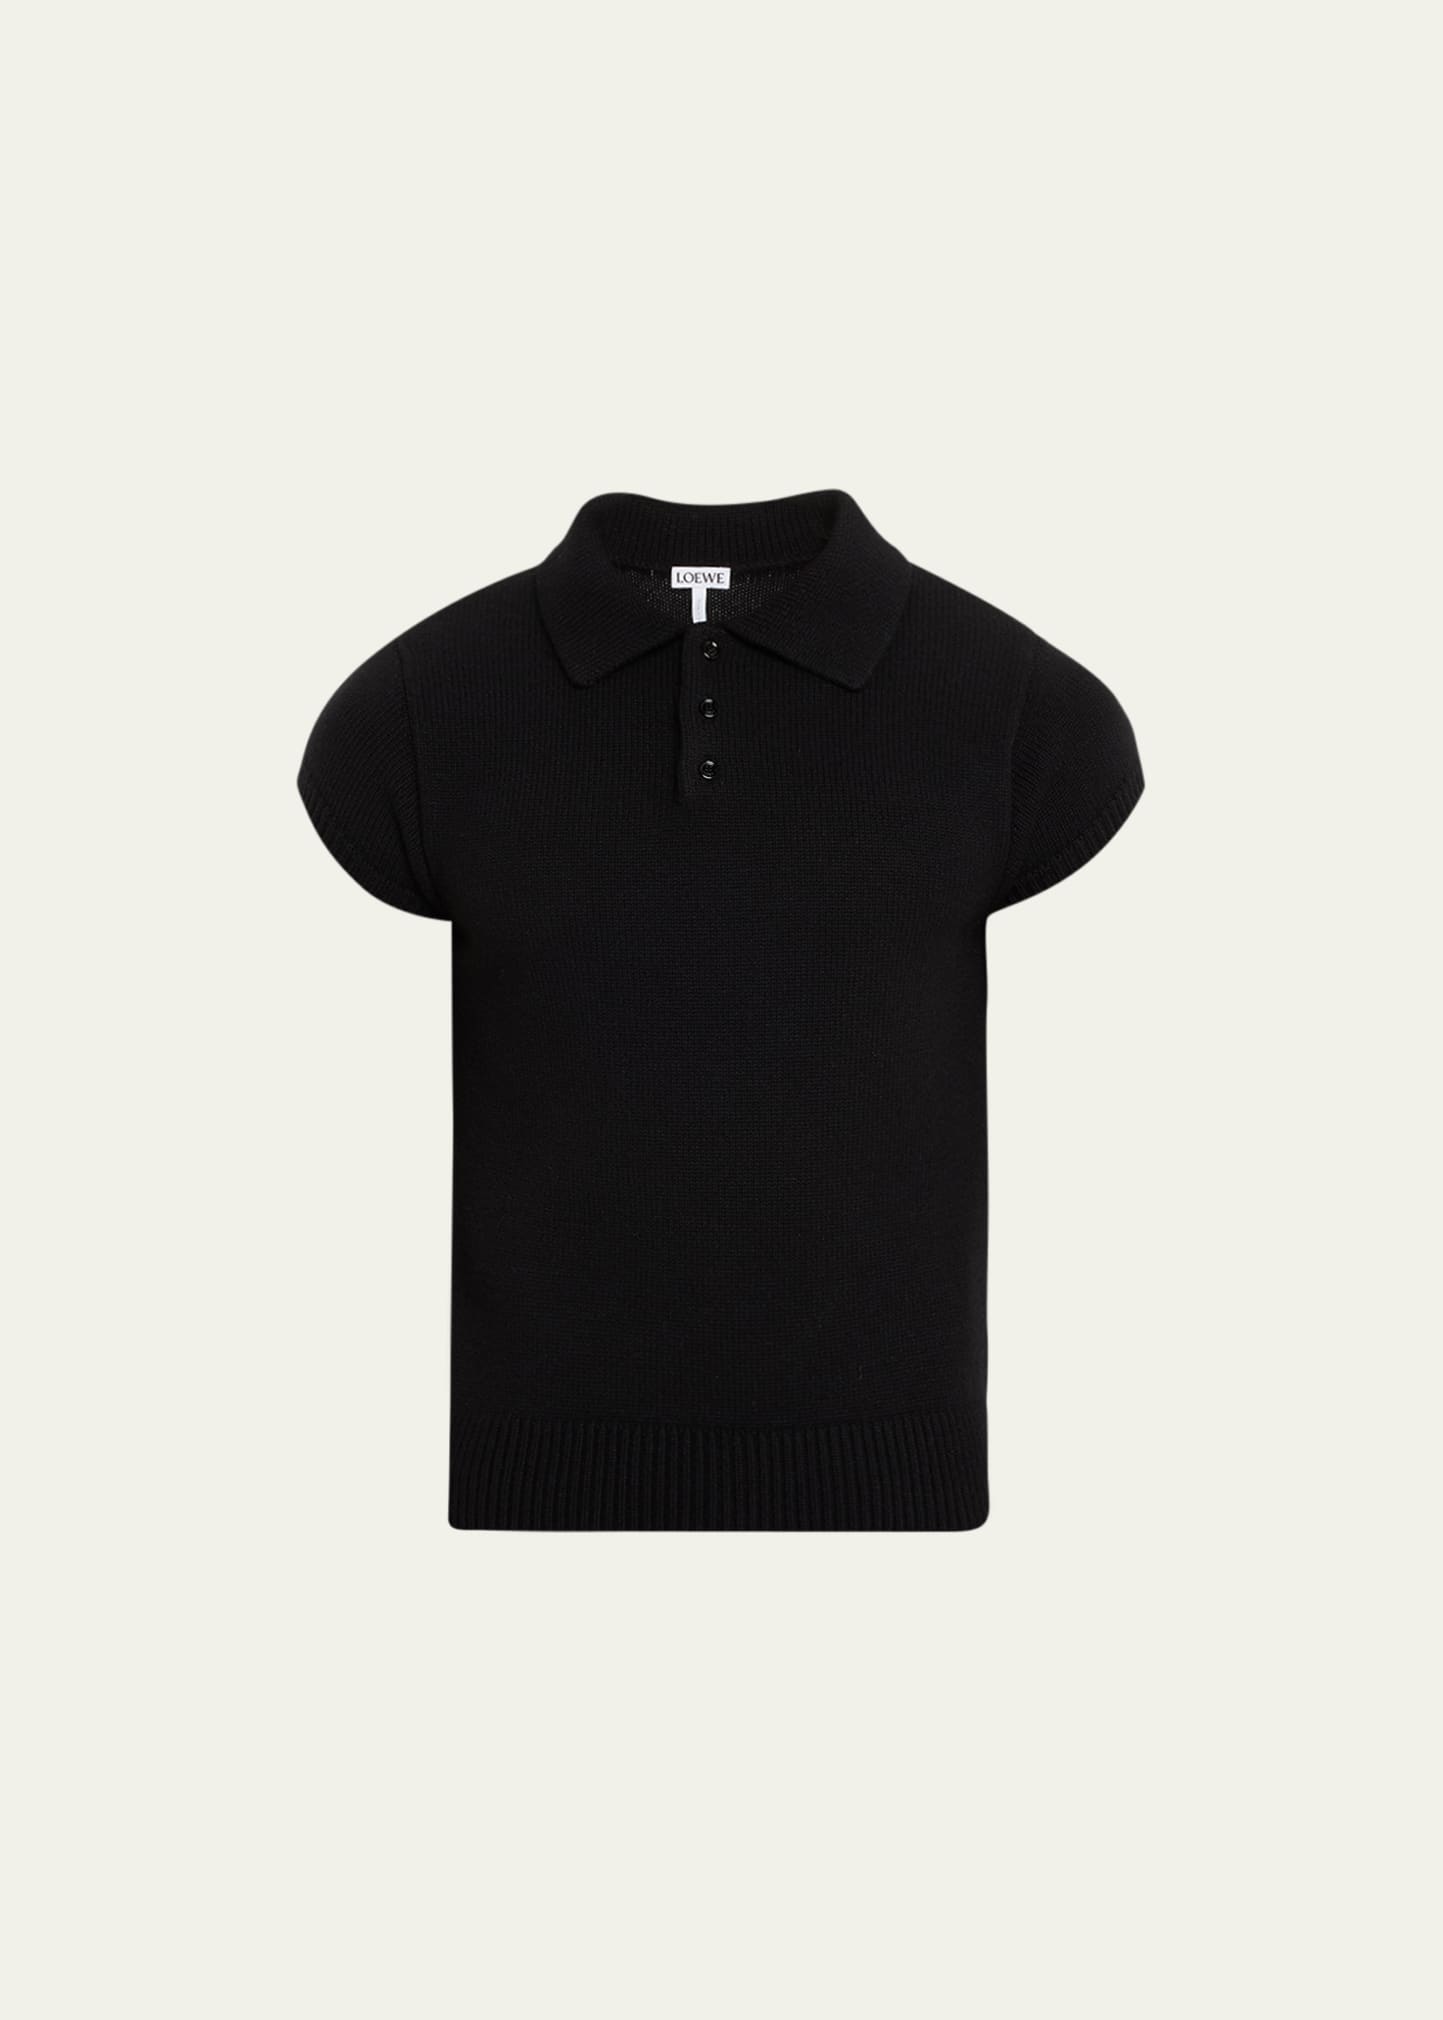 Loewe Men's Stretch Cashmere Polo Sweater In Black